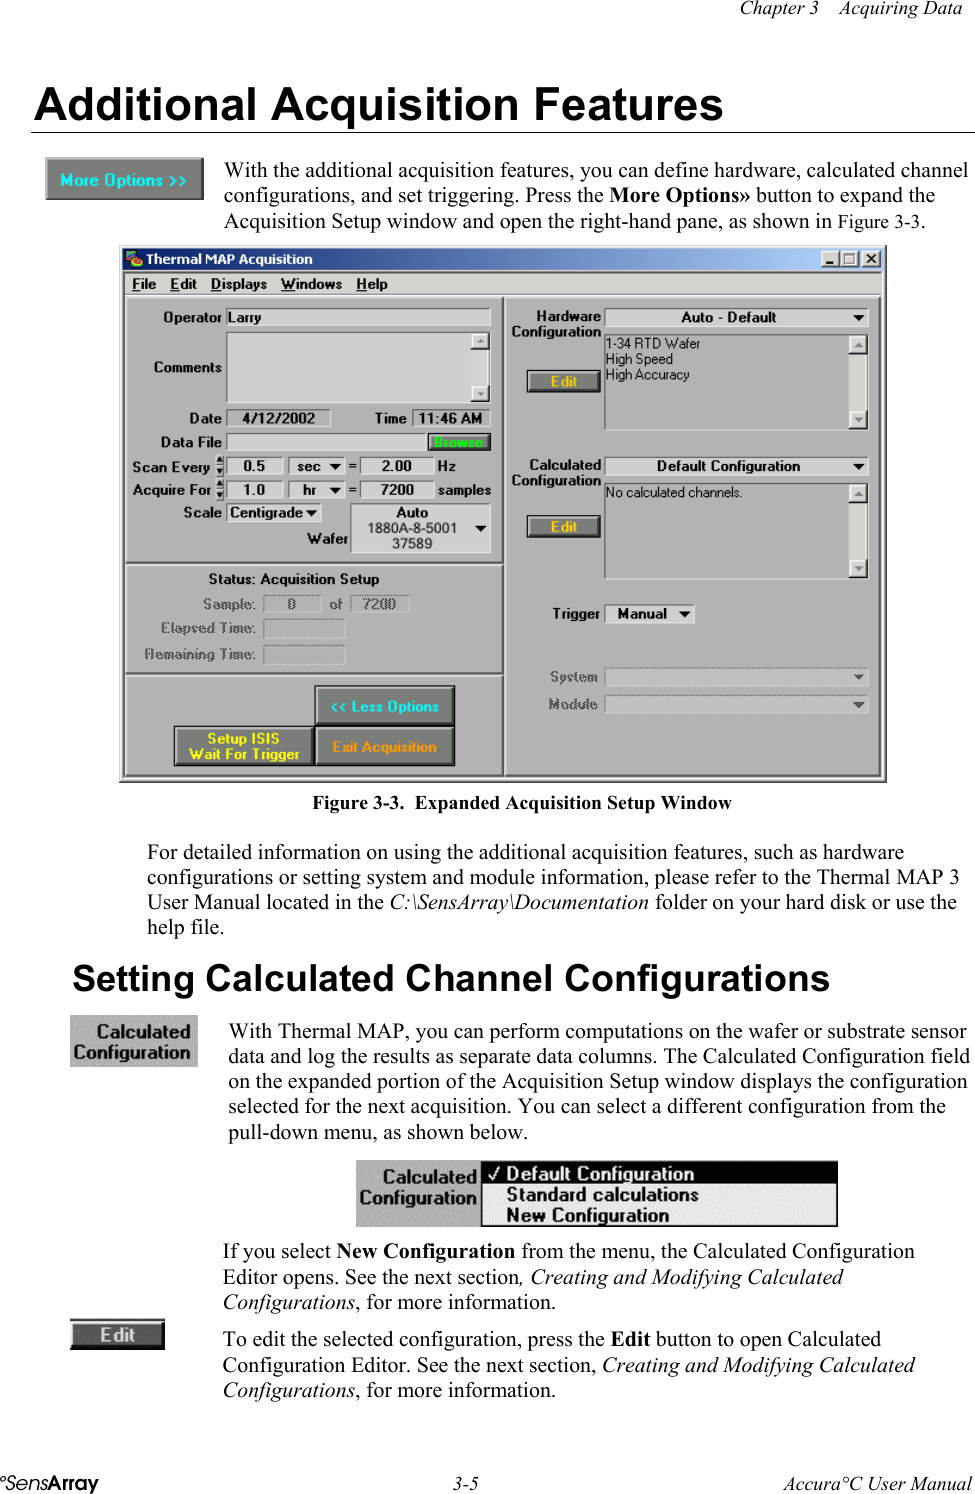    Chapter 3    Acquiring Data °SensArray  3-5  Accura°C User Manual  Additional Acquisition Features  With the additional acquisition features, you can define hardware, calculated channel configurations, and set triggering. Press the More Options» button to expand the Acquisition Setup window and open the right-hand pane, as shown in Figure 3-3.   Figure 3-3.  Expanded Acquisition Setup Window For detailed information on using the additional acquisition features, such as hardware configurations or setting system and module information, please refer to the Thermal MAP 3 User Manual located in the C:\SensArray\Documentation folder on your hard disk or use the help file. Setting Calculated Channel Configurations  With Thermal MAP, you can perform computations on the wafer or substrate sensor data and log the results as separate data columns. The Calculated Configuration field on the expanded portion of the Acquisition Setup window displays the configuration selected for the next acquisition. You can select a different configuration from the pull-down menu, as shown below.  If you select New Configuration from the menu, the Calculated Configuration Editor opens. See the next section, Creating and Modifying Calculated Configurations, for more information.  To edit the selected configuration, press the Edit button to open Calculated Configuration Editor. See the next section, Creating and Modifying Calculated Configurations, for more information. 